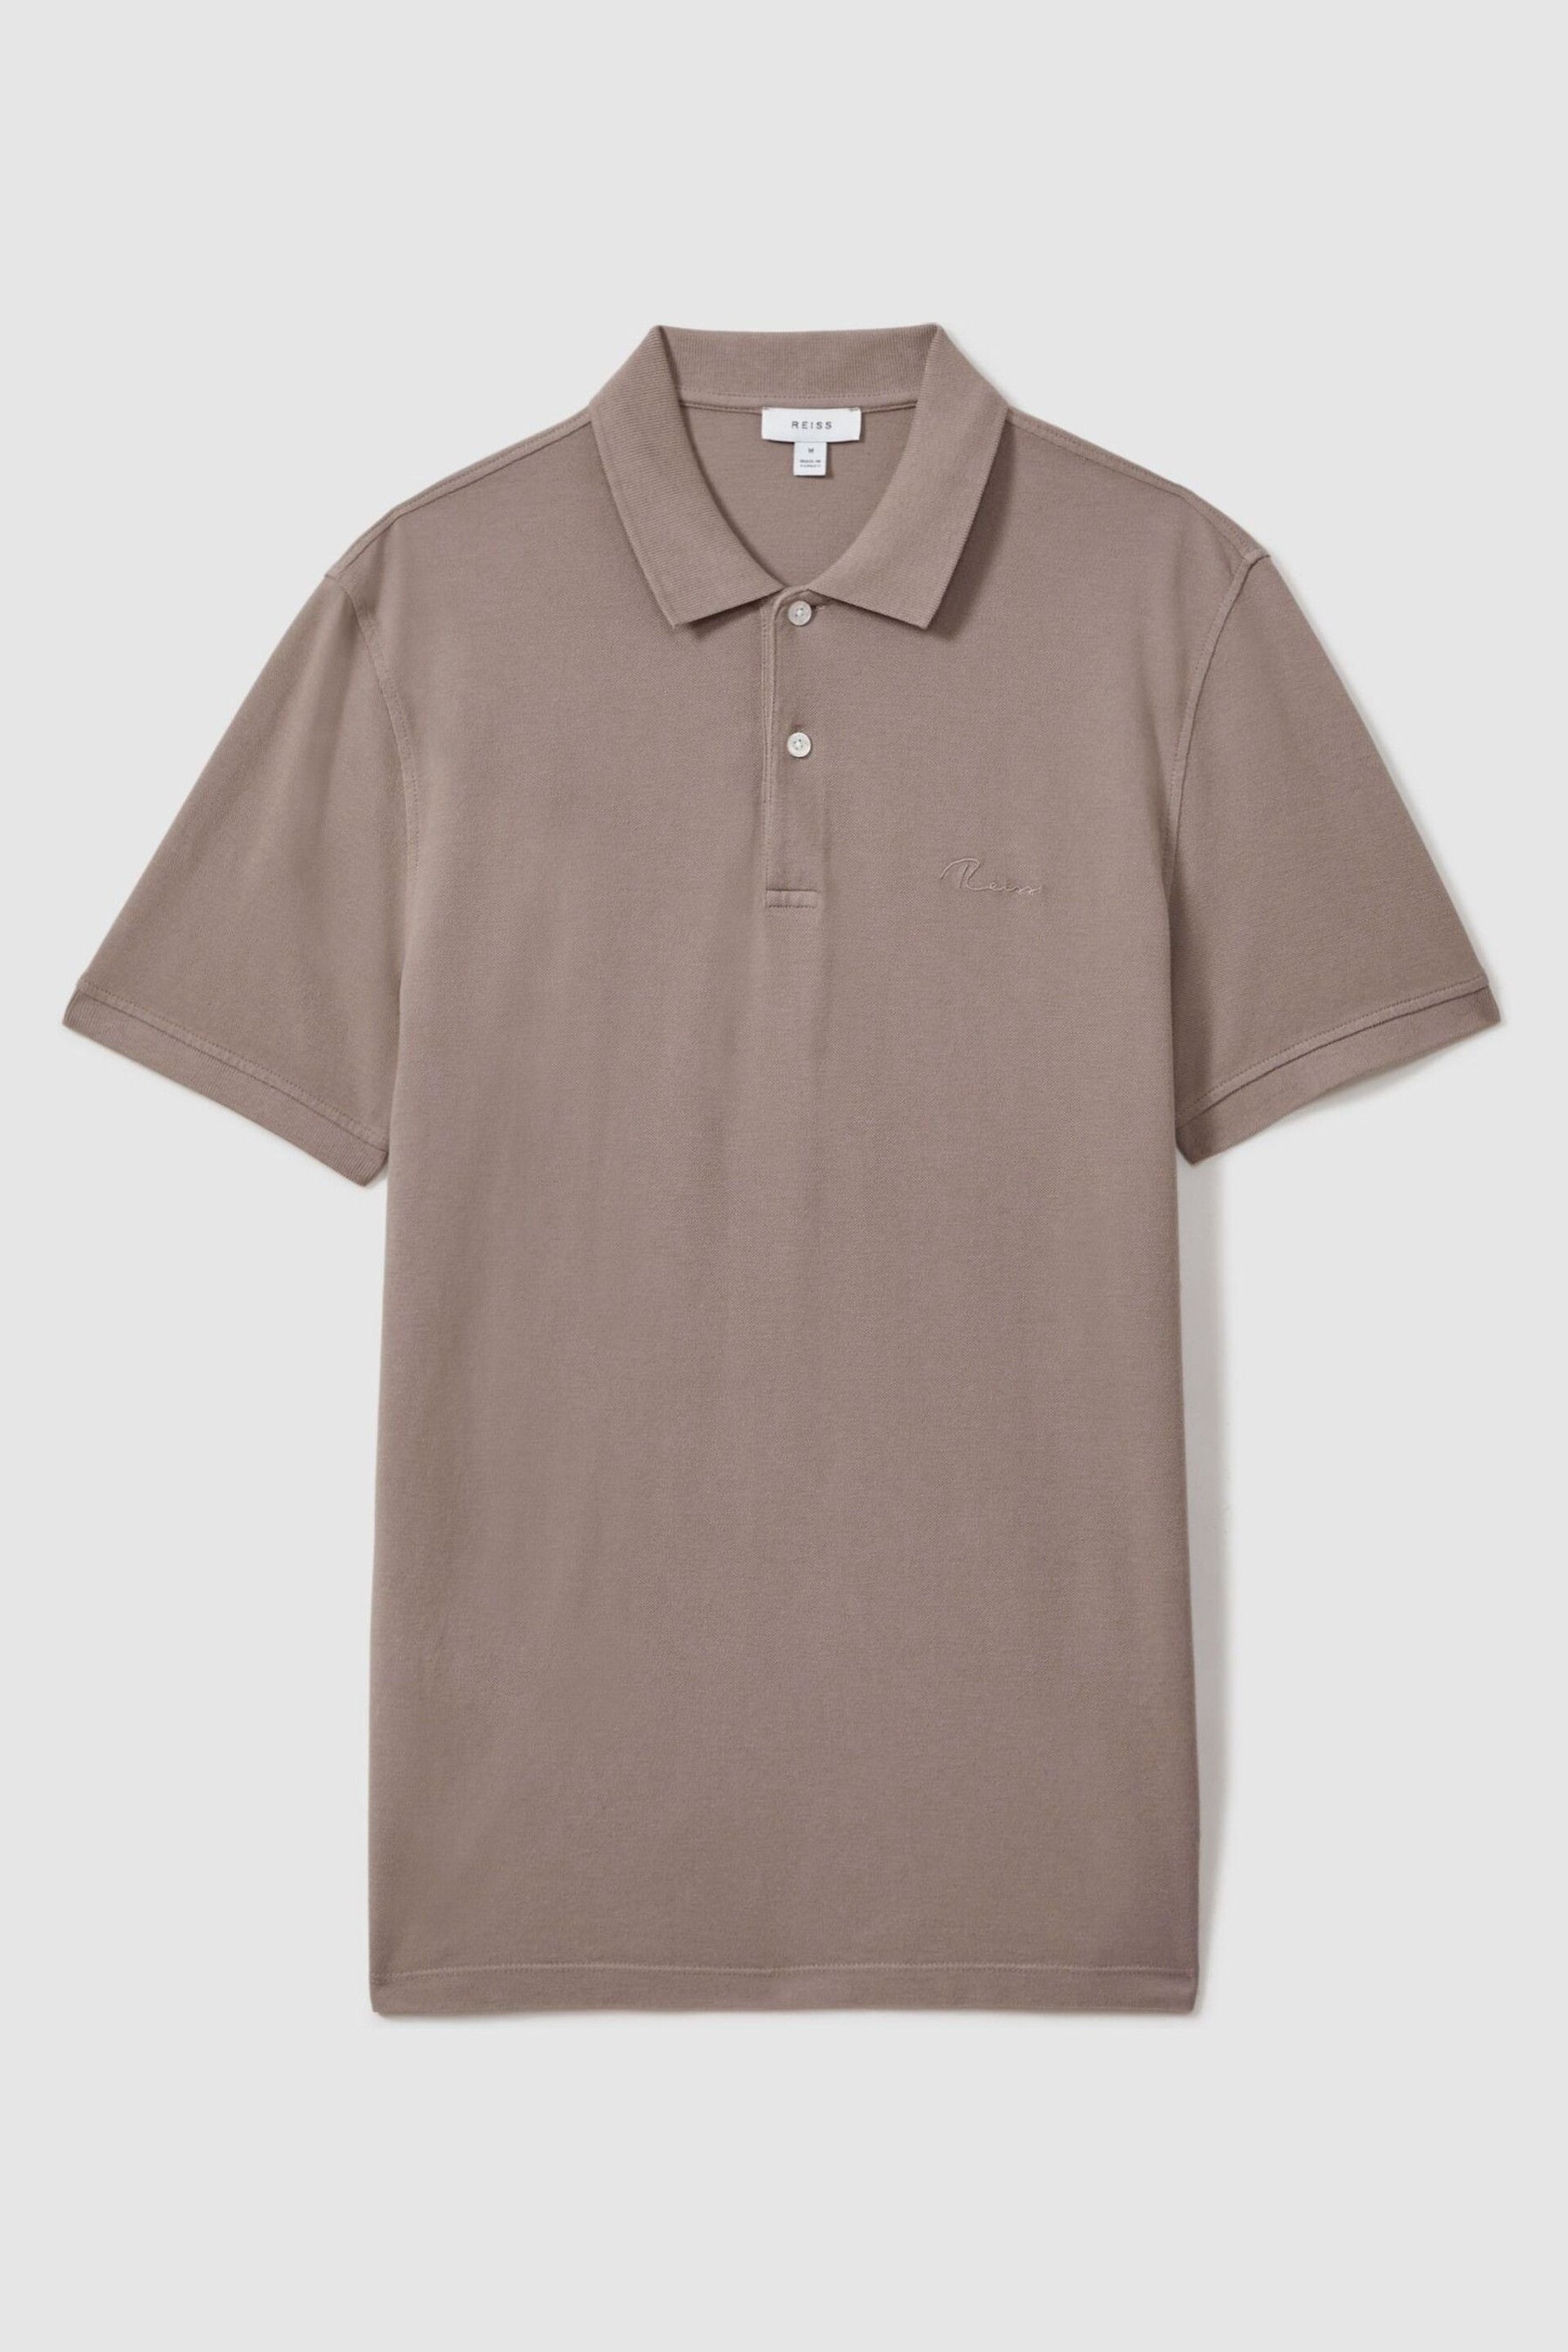 Reiss Dark Taupe Peters Slim Fit Garment Dyed Embroidered Polo Shirt - Image 2 of 6